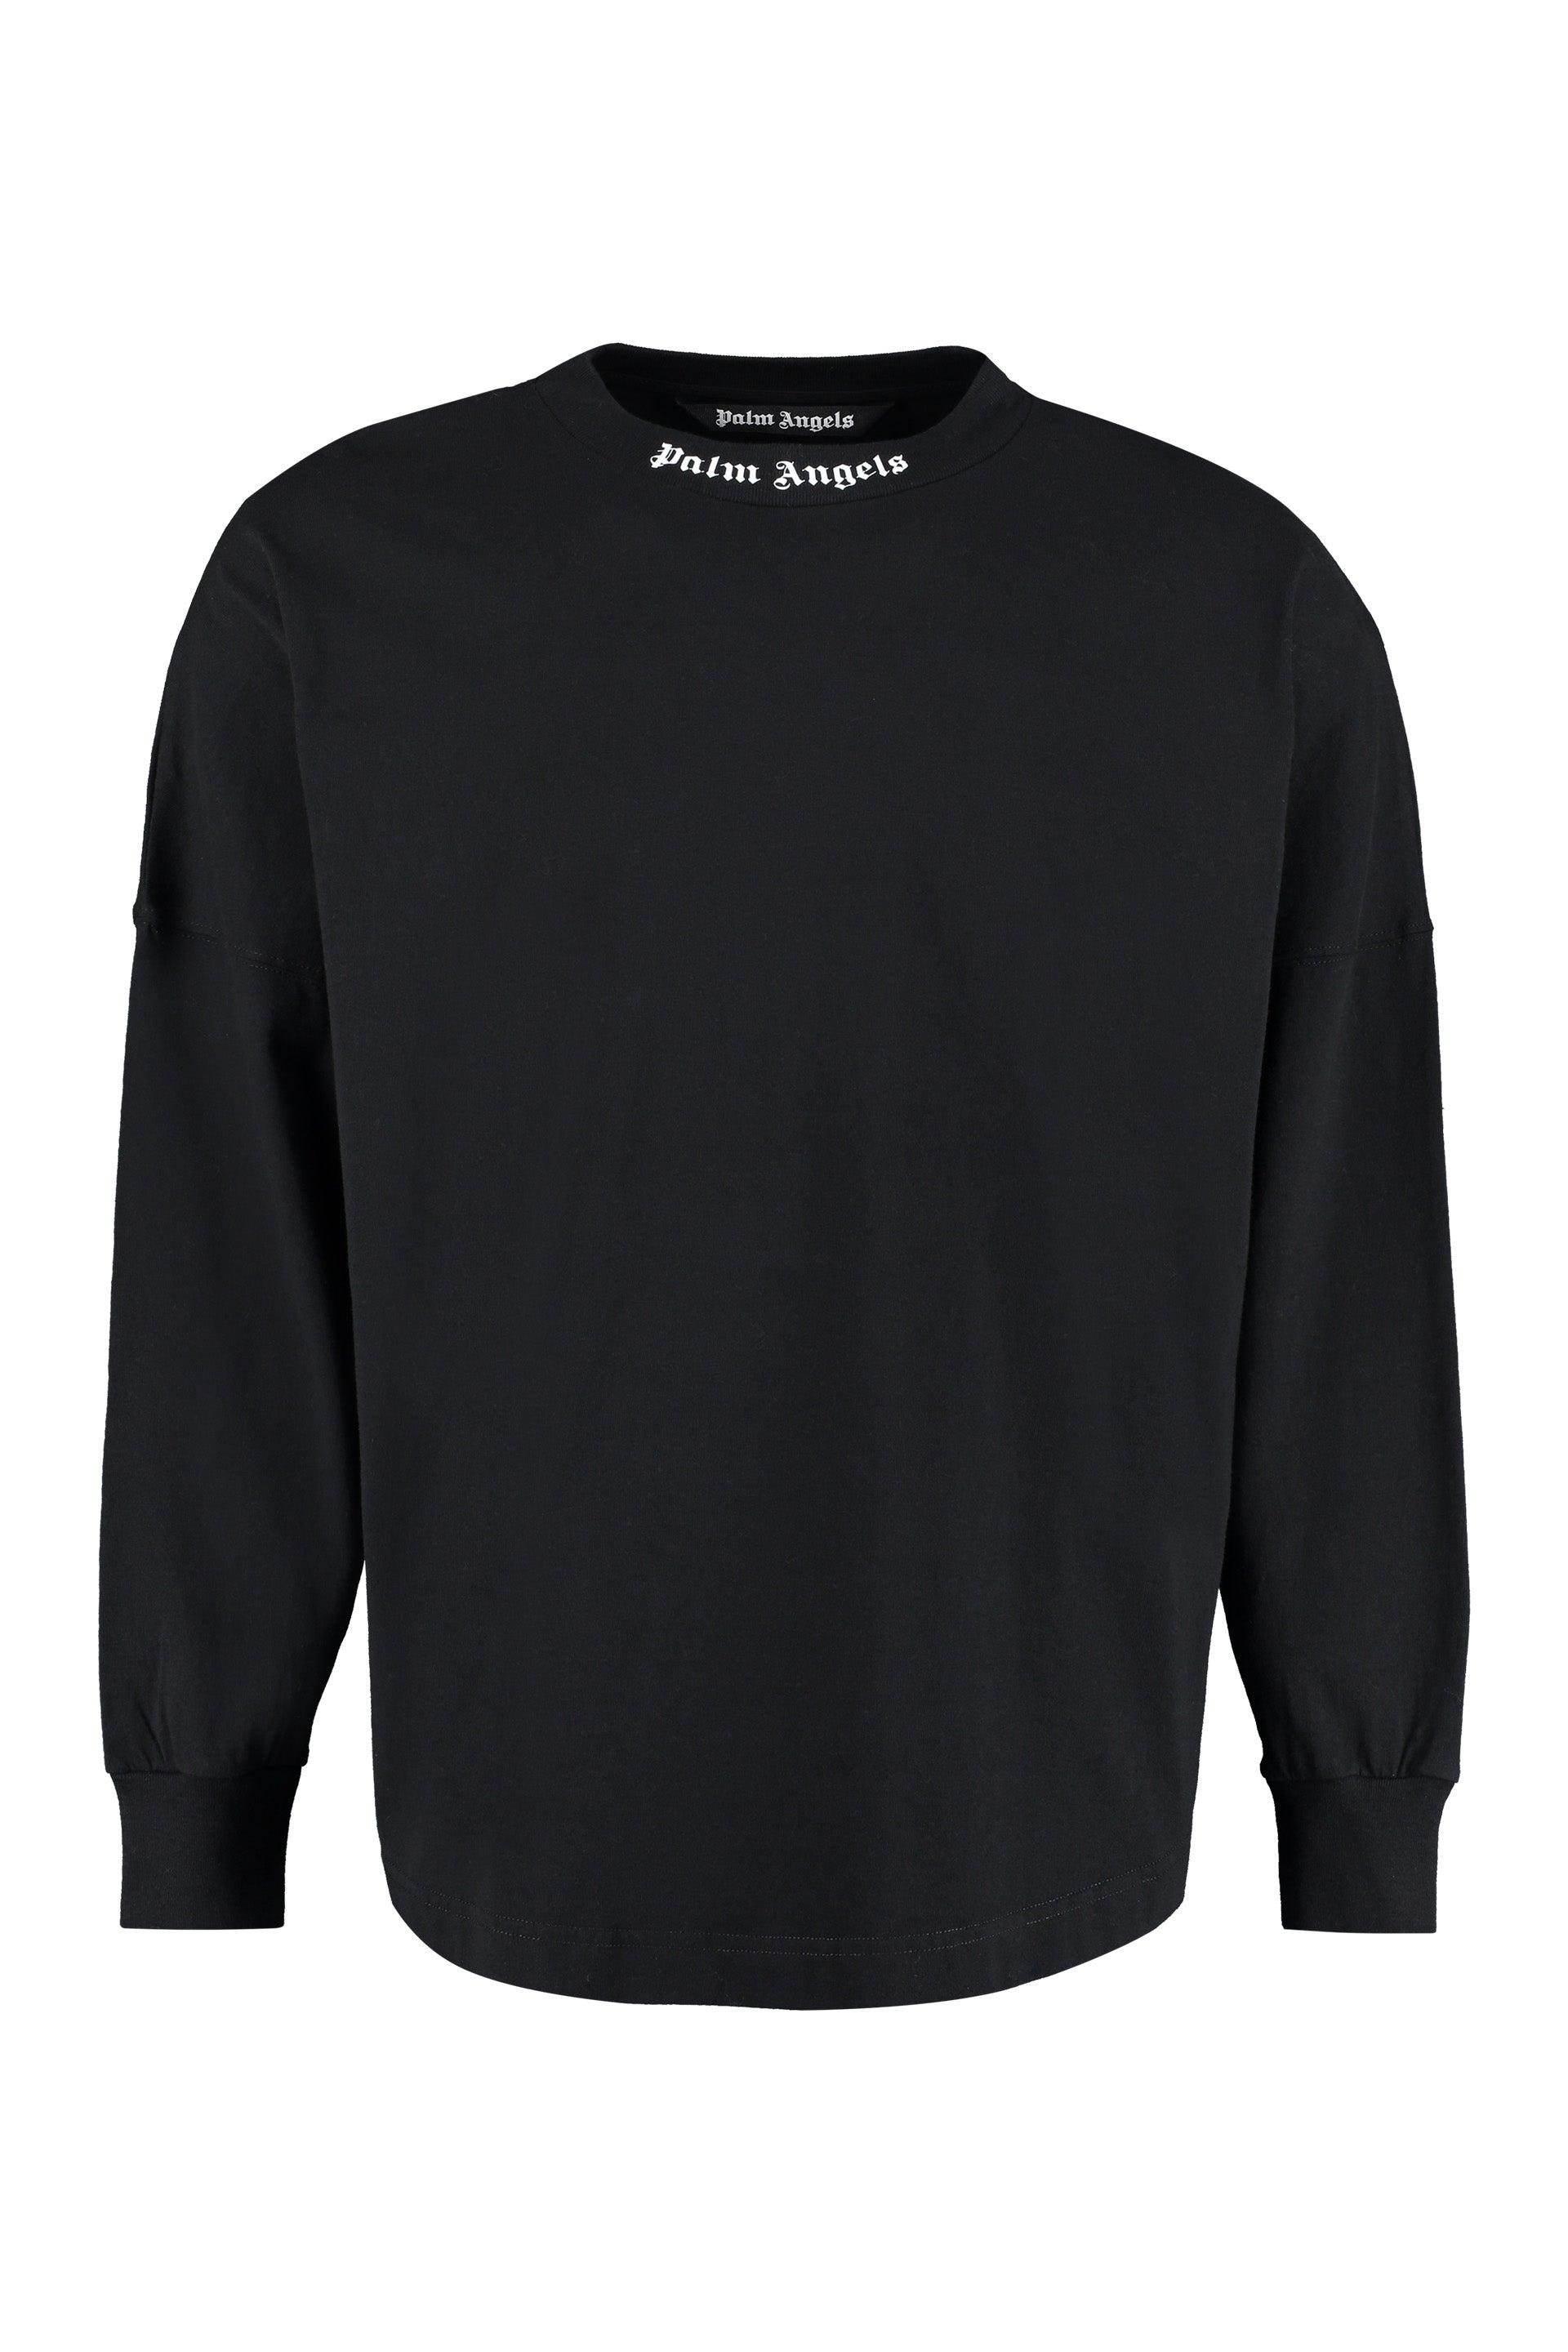 Palm Angels Long Sleeve Cotton T-shirt for Men | Lyst